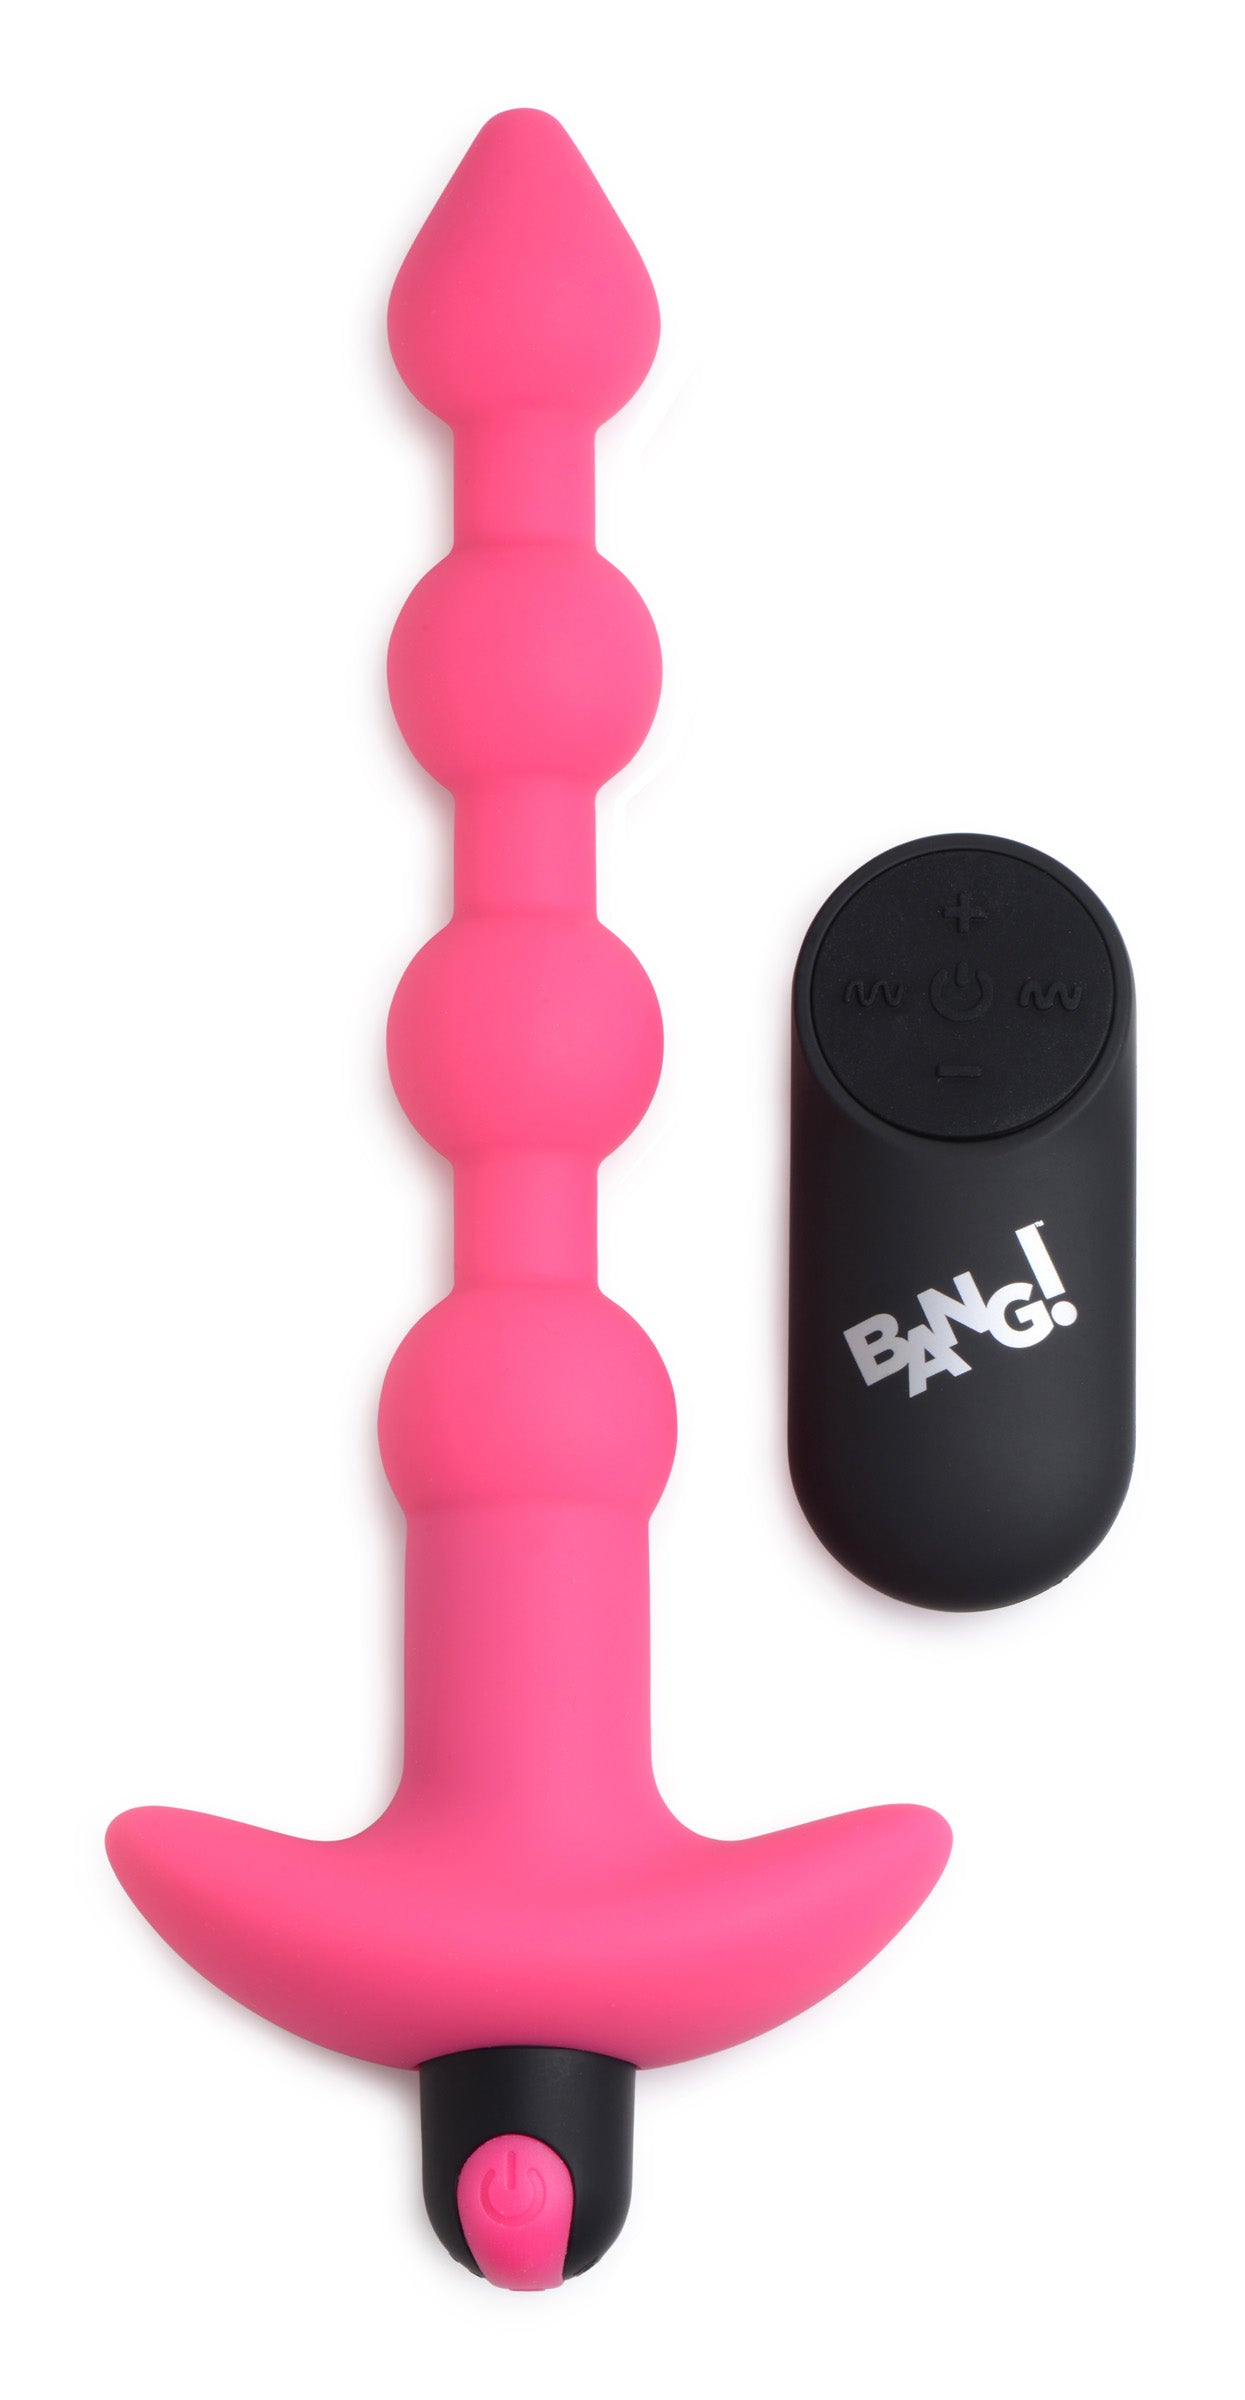 Bang - Vibrating Silicone Anal Beads and Remote Control - Pink